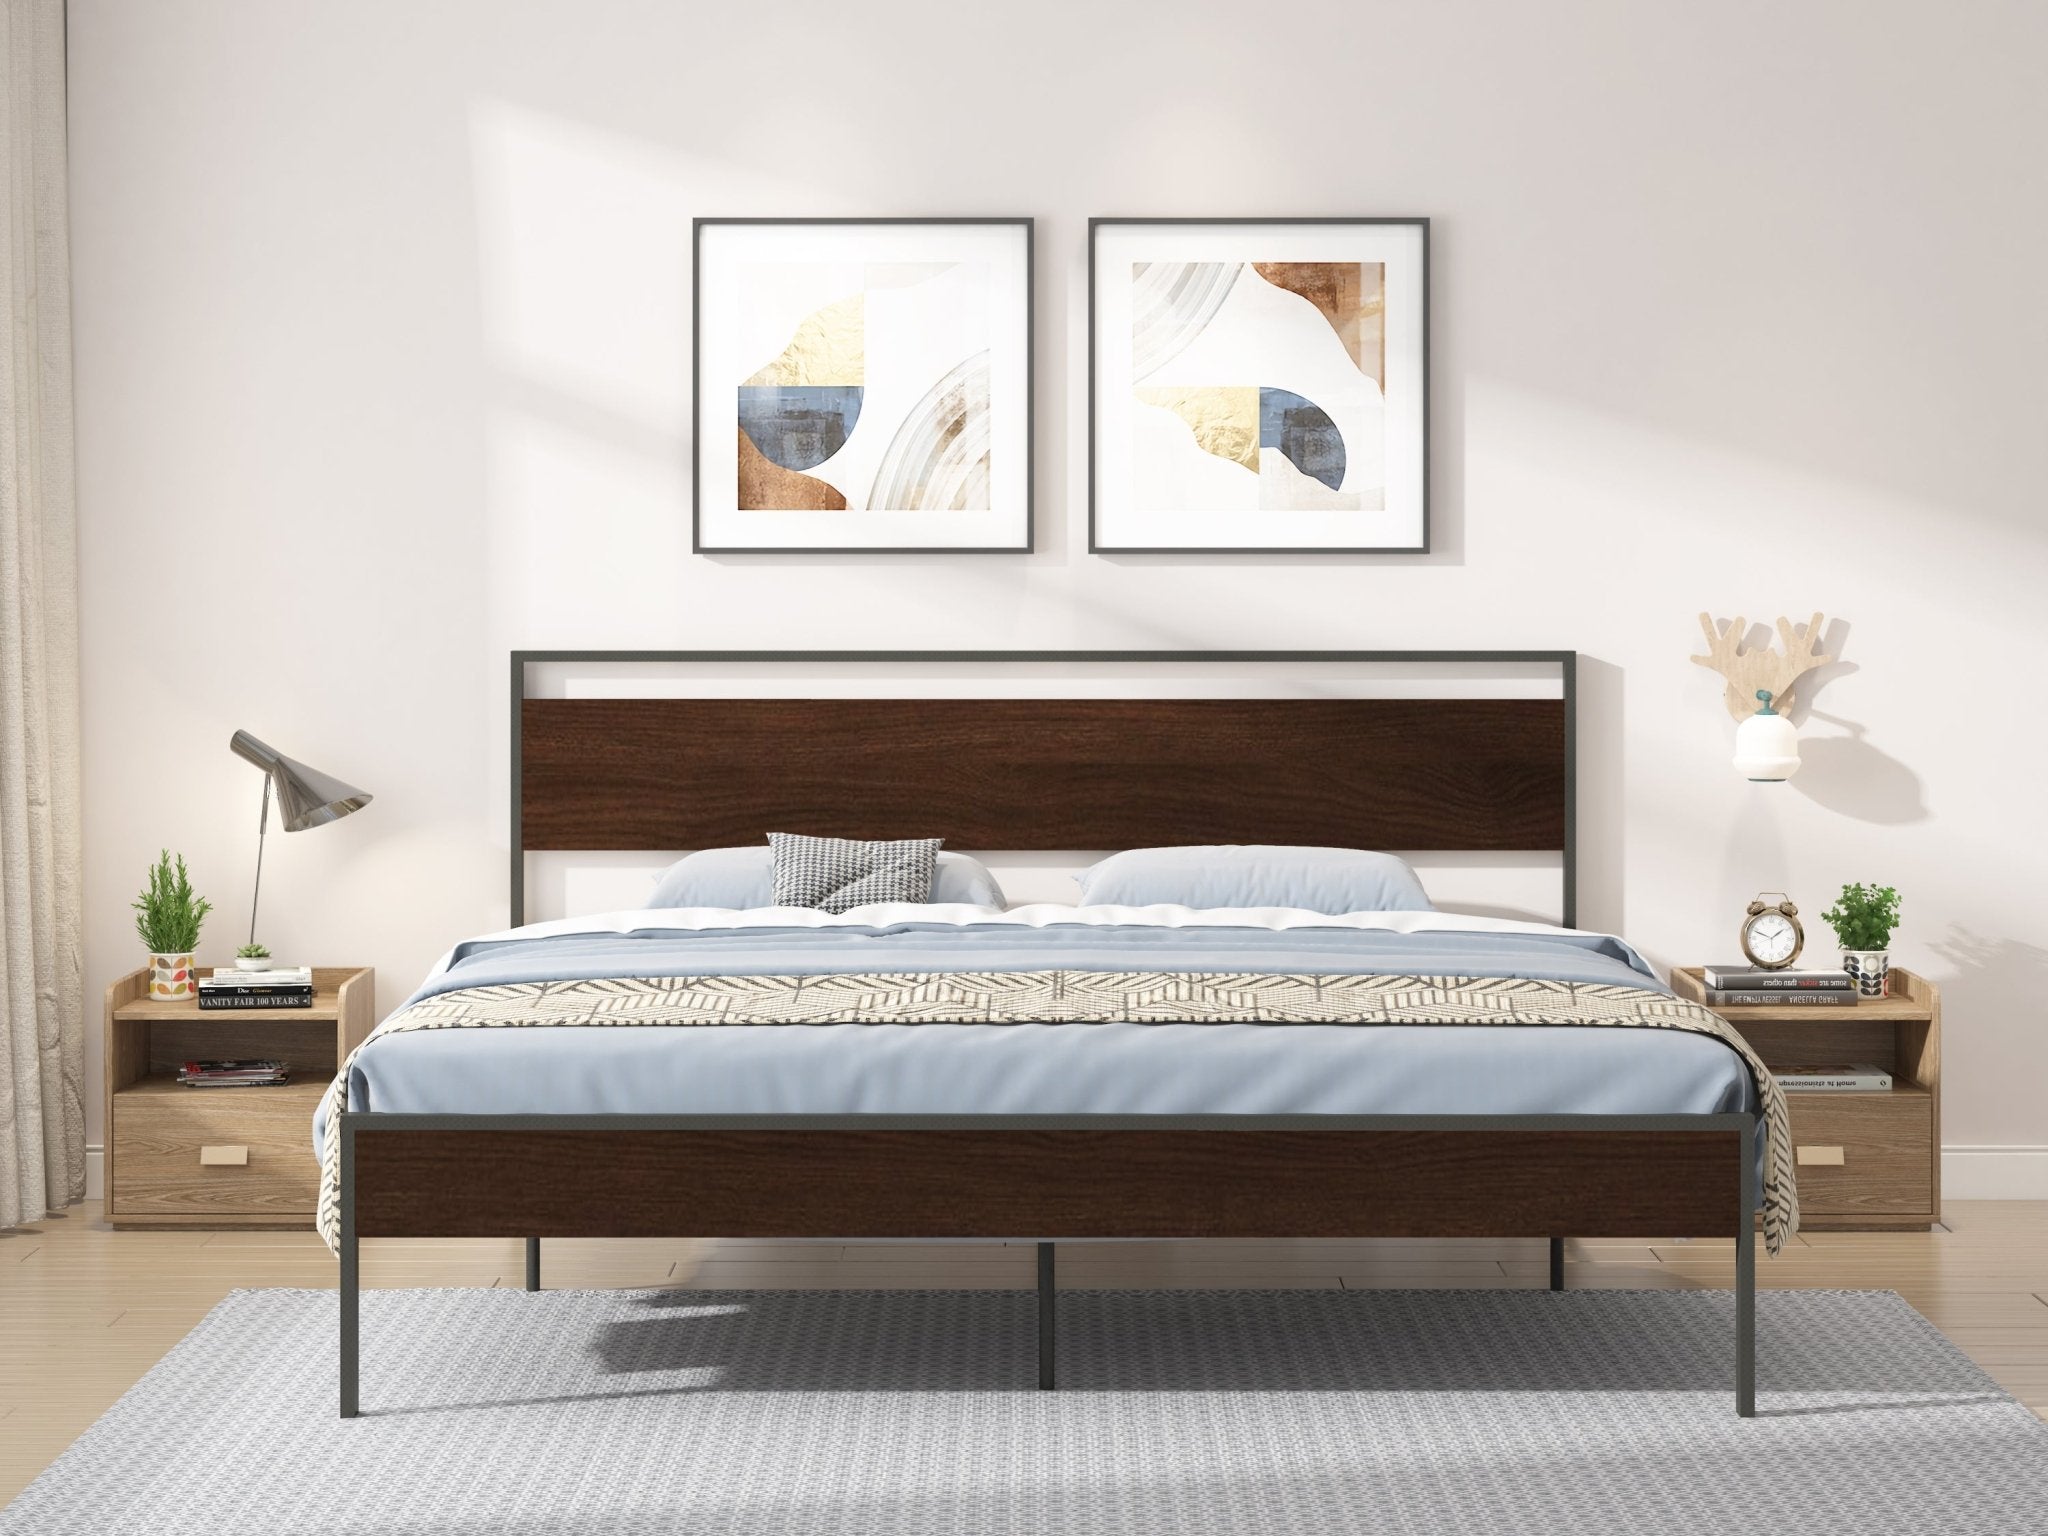 Ceres Metal King Bed, Black with Walnut wood Headboard - Tuesday Morning-Beds & Bed Frames